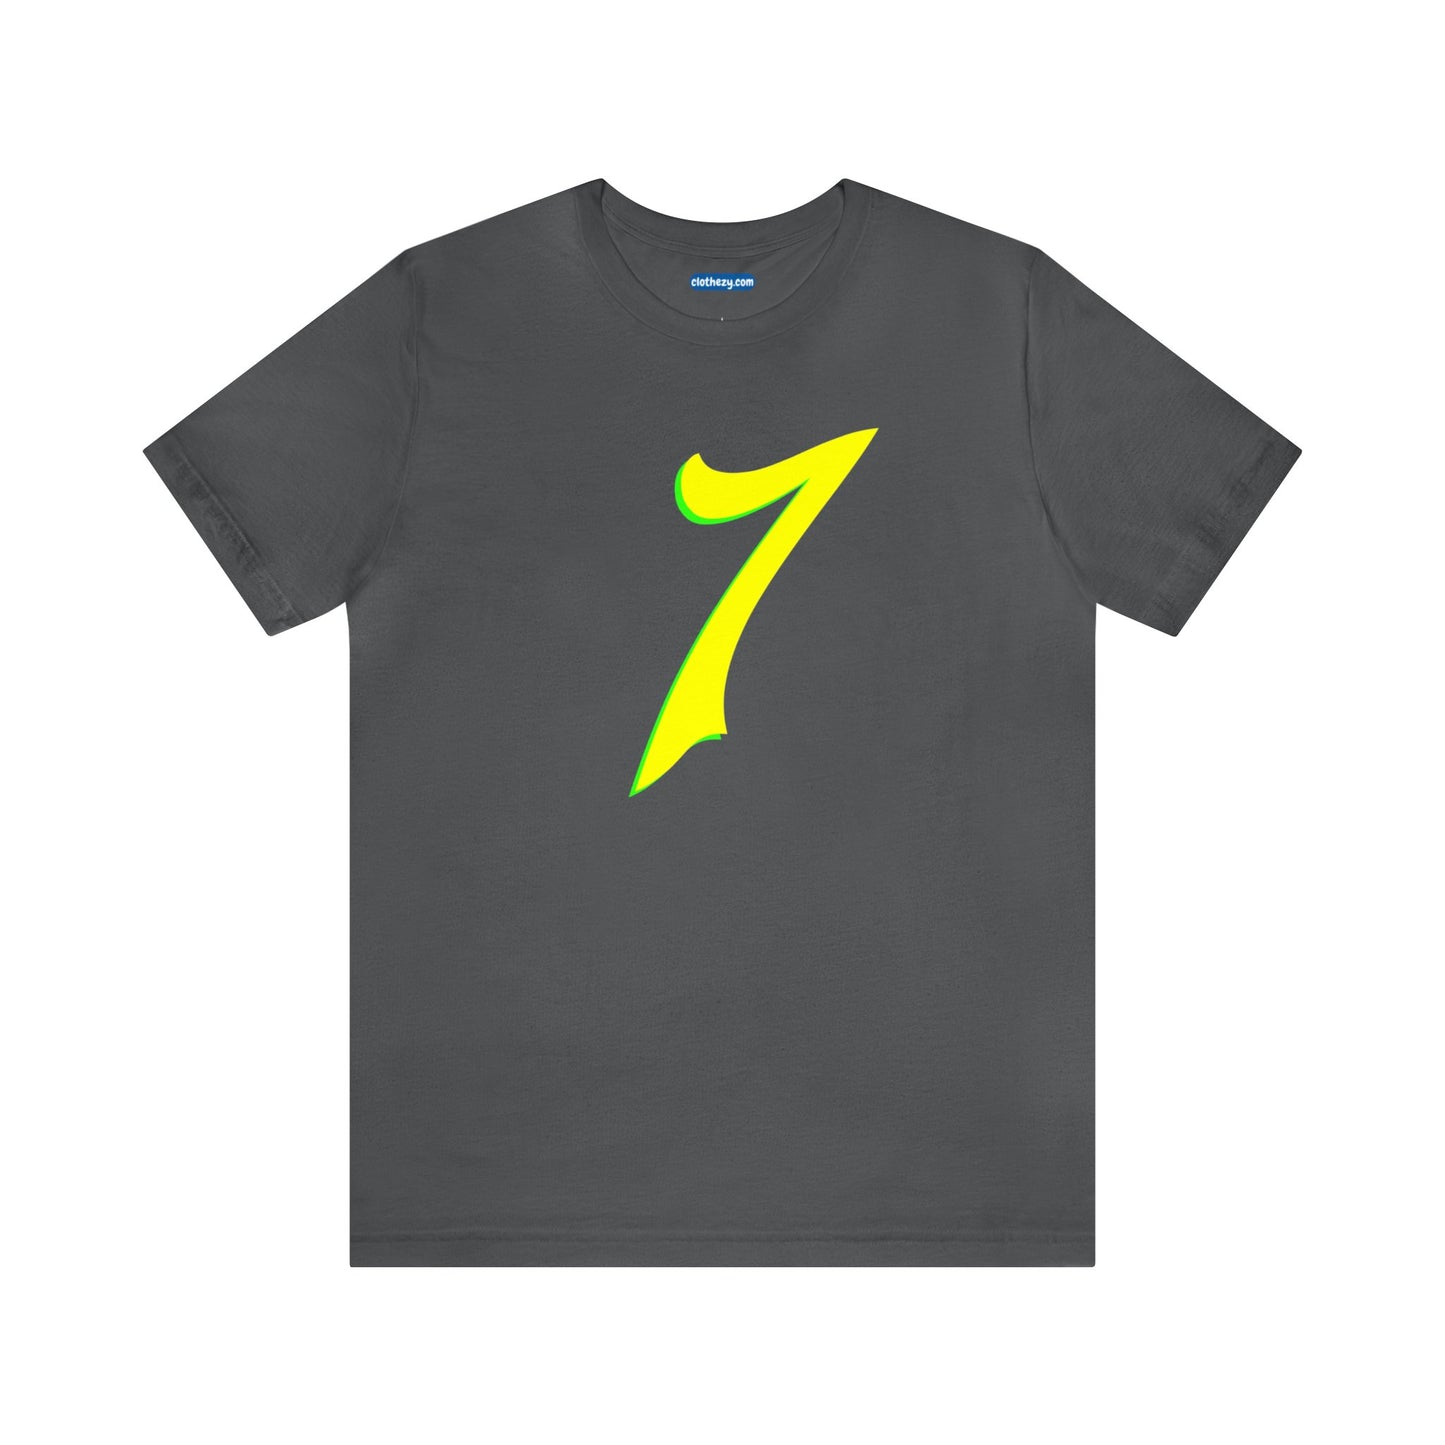 Number 7 Design - Soft Cotton Tee for birthdays and celebrations, Gift for friends and family, Multiple Options by clothezy.com in Black Size Small - Buy Now